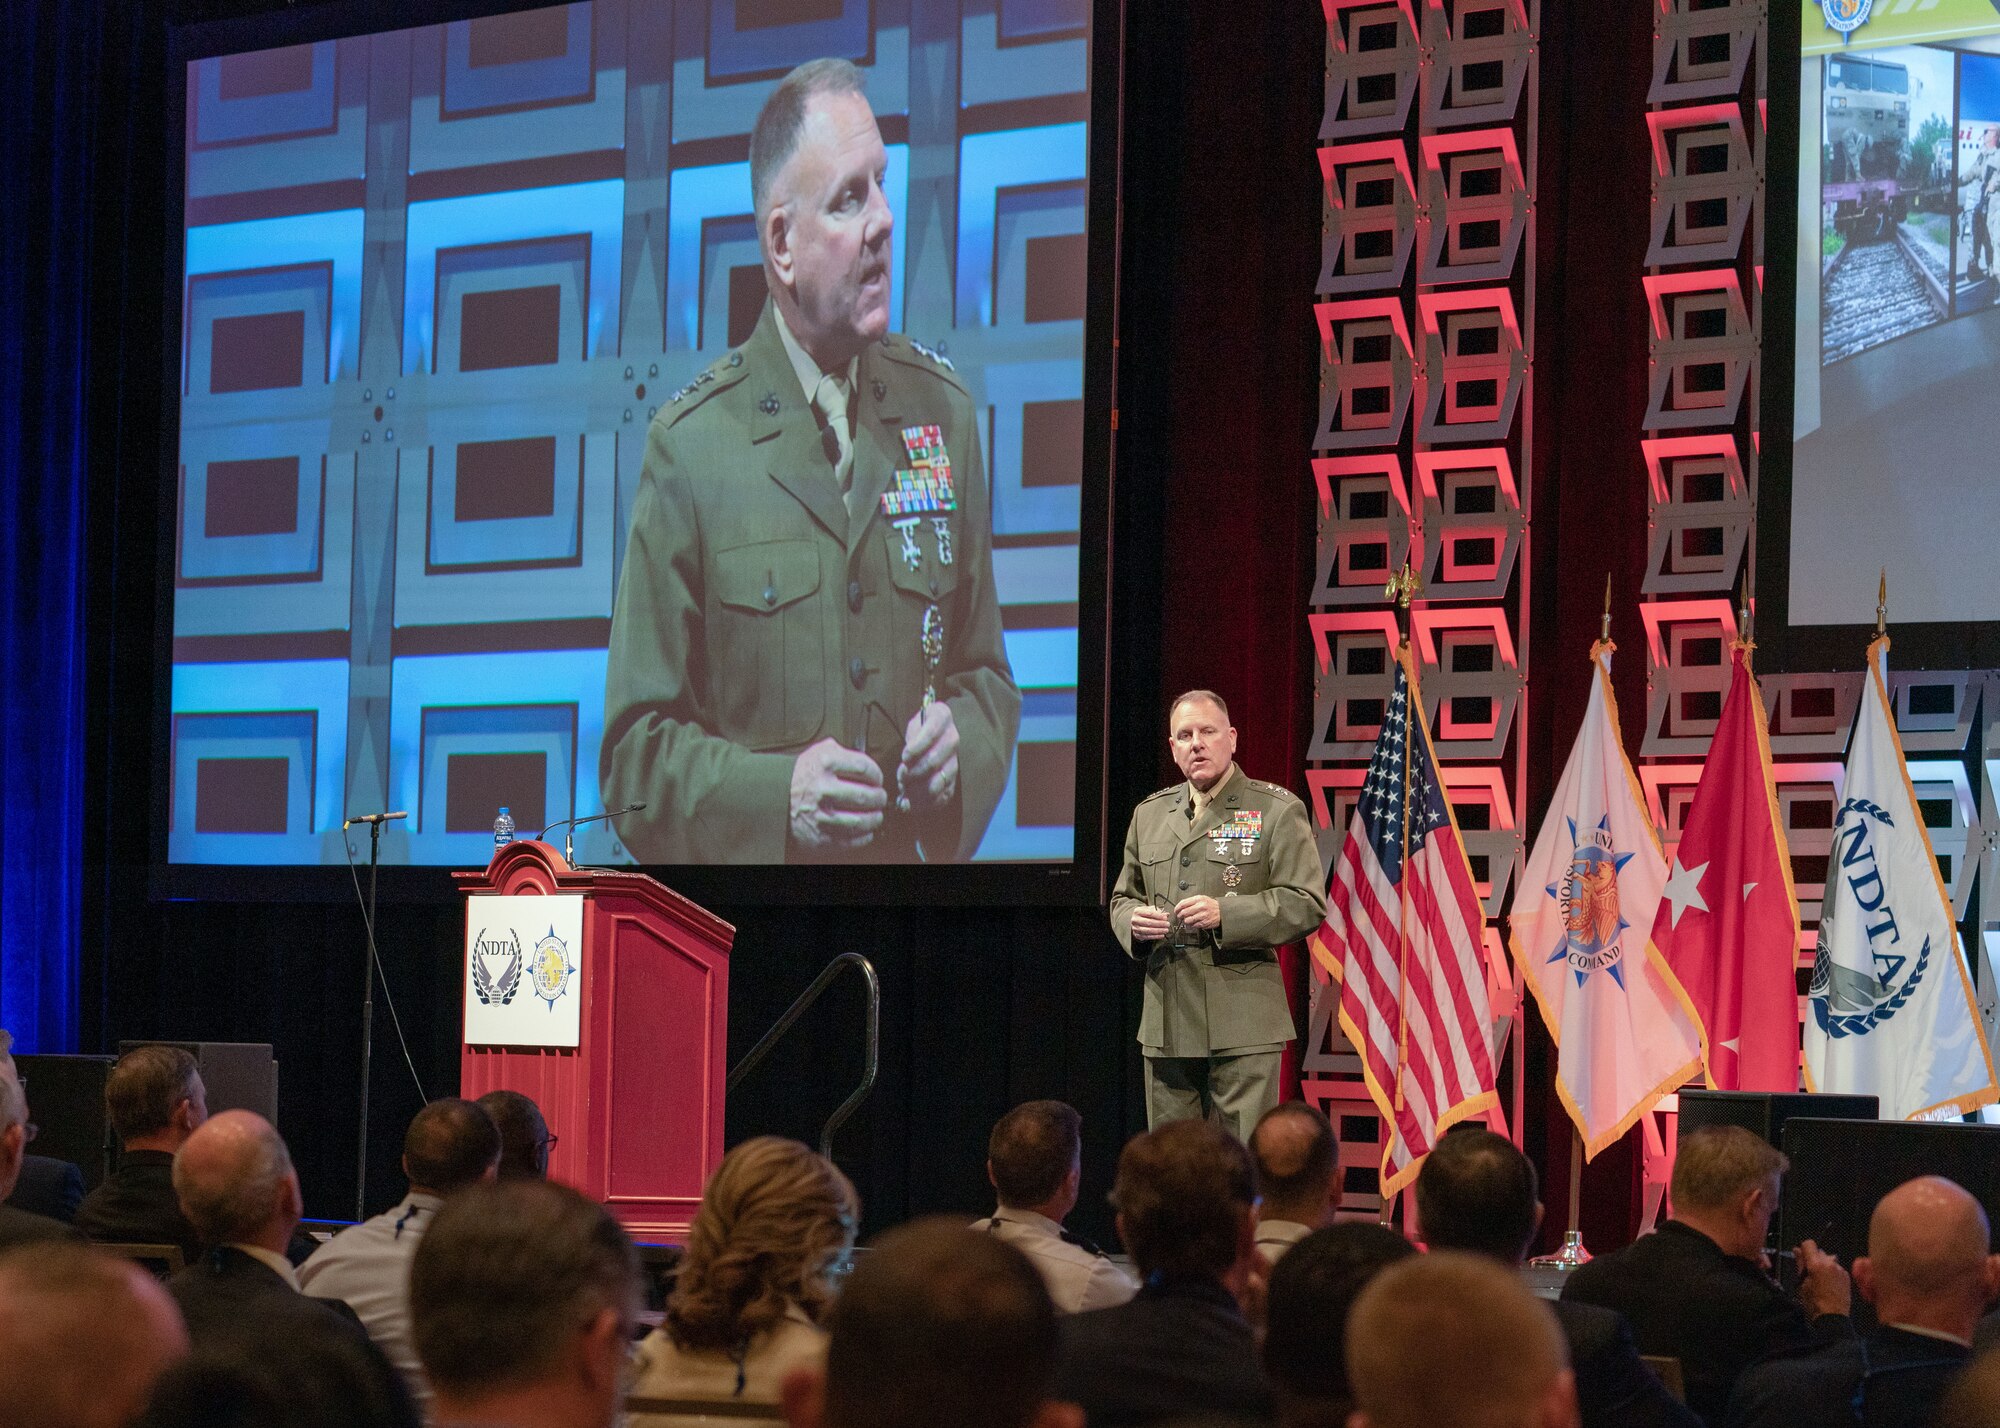 Former U.S. Transportation Command Deputy Commander, U.S. Marine Corps Lt. Gen. John Broadmeadow, speaks at the 2018 National Defense Transportation Association-U.S. Transportation Command Fall Meeting, Gaylord Convention Center, National Harbor, Oxen Hill, Maryland.  The seventh-annual NDTA-USTRANSCOM Fall Meeting, occurring Oct. 7-10, 2019, Union Station, St. Louis, Missouri, features five keynote speakers including USTRANSCOM Commander U.S. Army General Stephen Lyons; U.S. Secretary of Transportation Elaine Chao; Assistant Secretary of Defense for Sustainment Robert McMahon; American Roll-On Roll-Off Carrier President and Chief Executive Officer Eric Ebeling; and FedEx Chief Economist Dr. Tim Mullaly. (Photo by Osmin Suguitan, USTRANSCOM/PA)